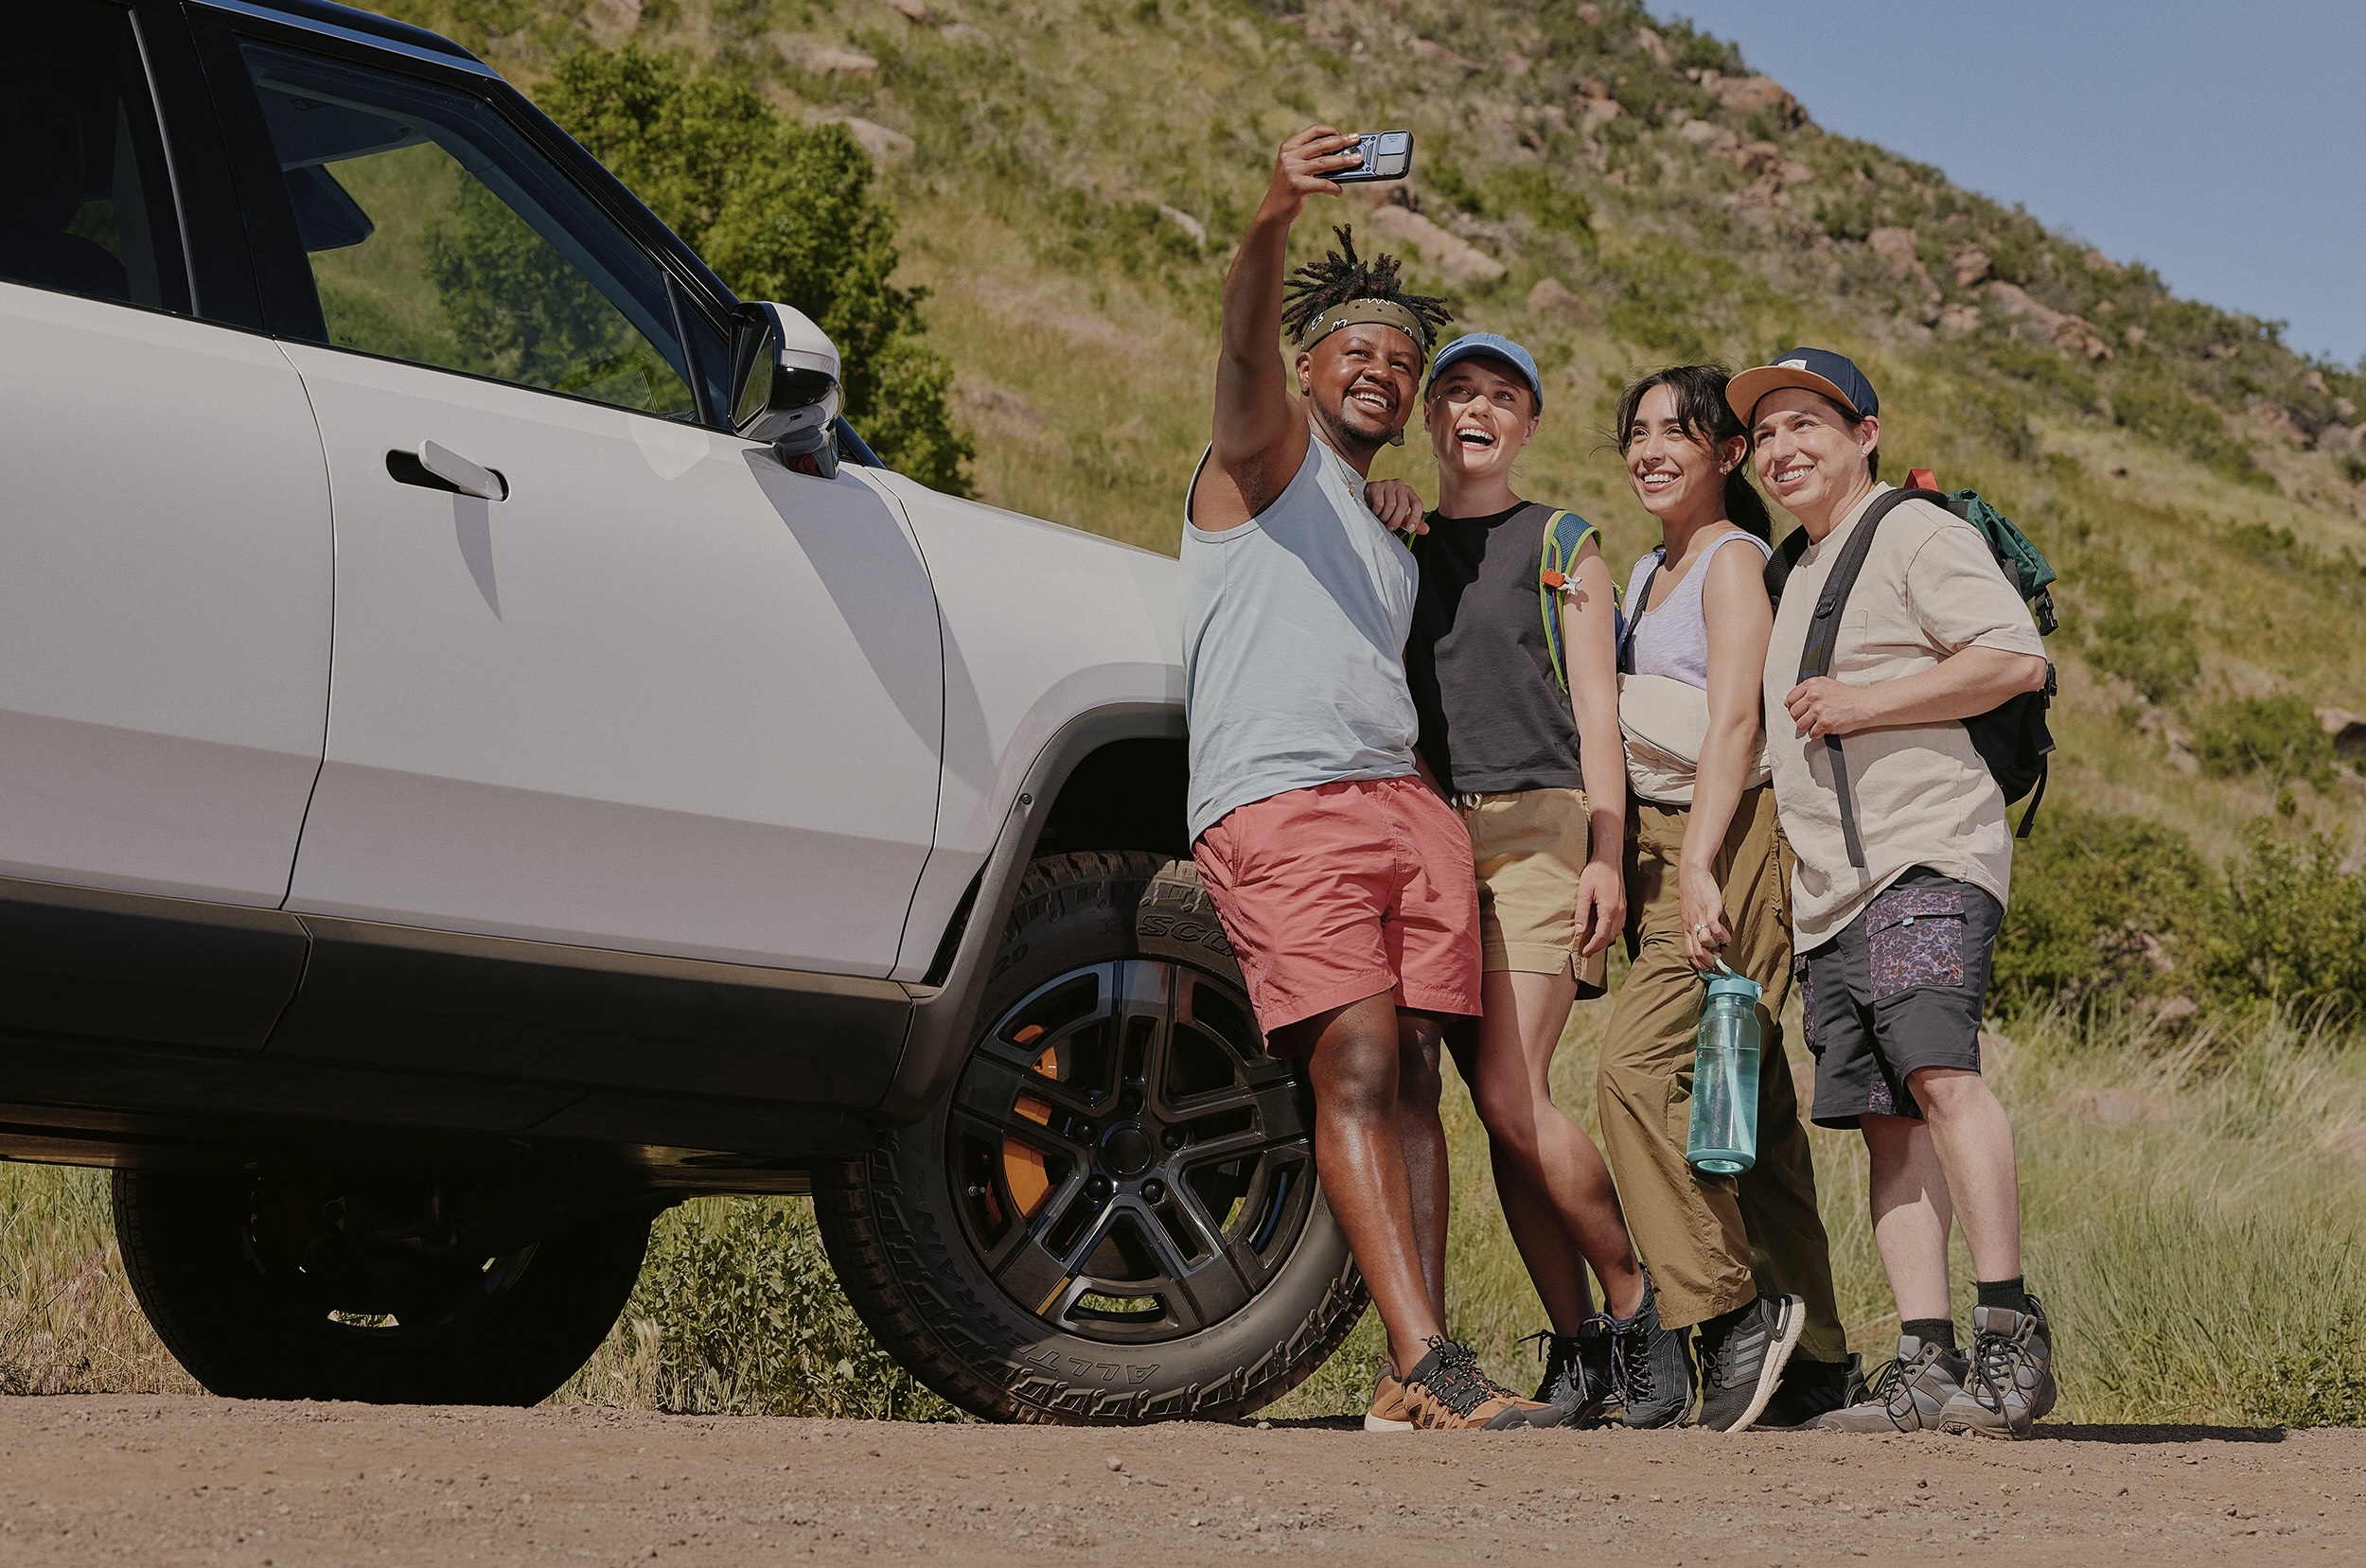 Four people take a selfie in front of an SUV on a dirt road.